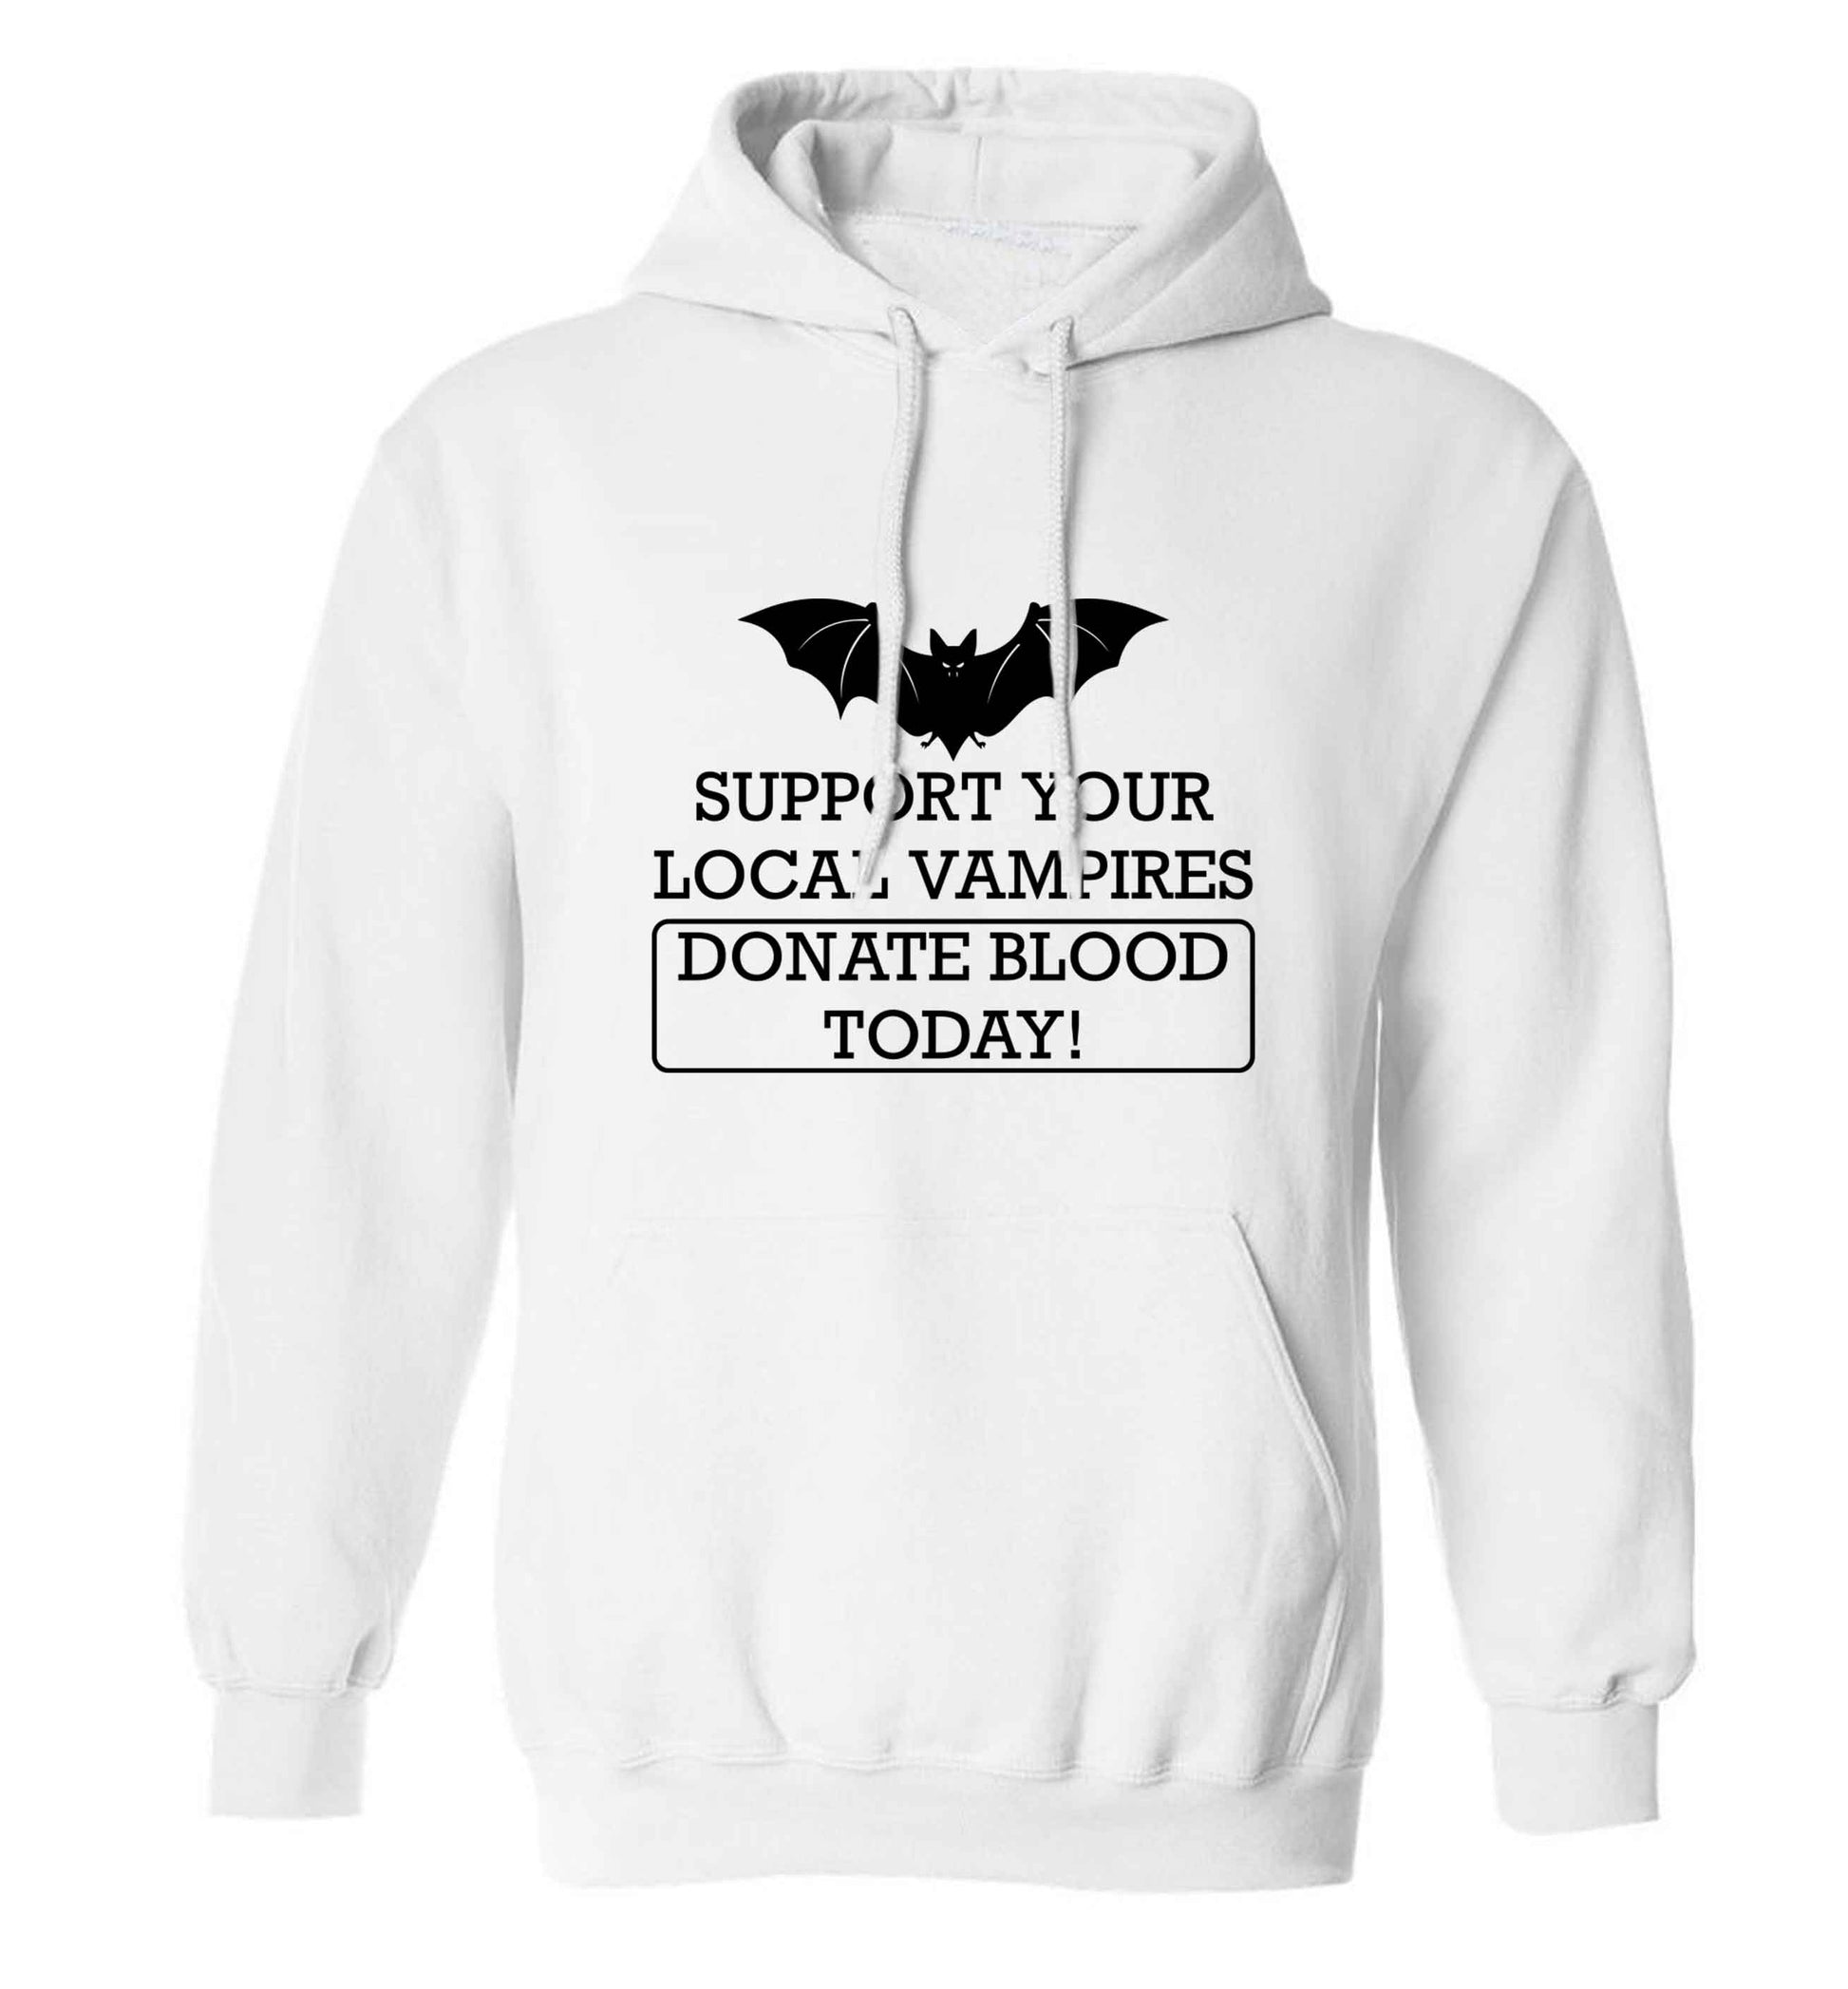 Support your local vampires donate blood today! adults unisex white hoodie 2XL